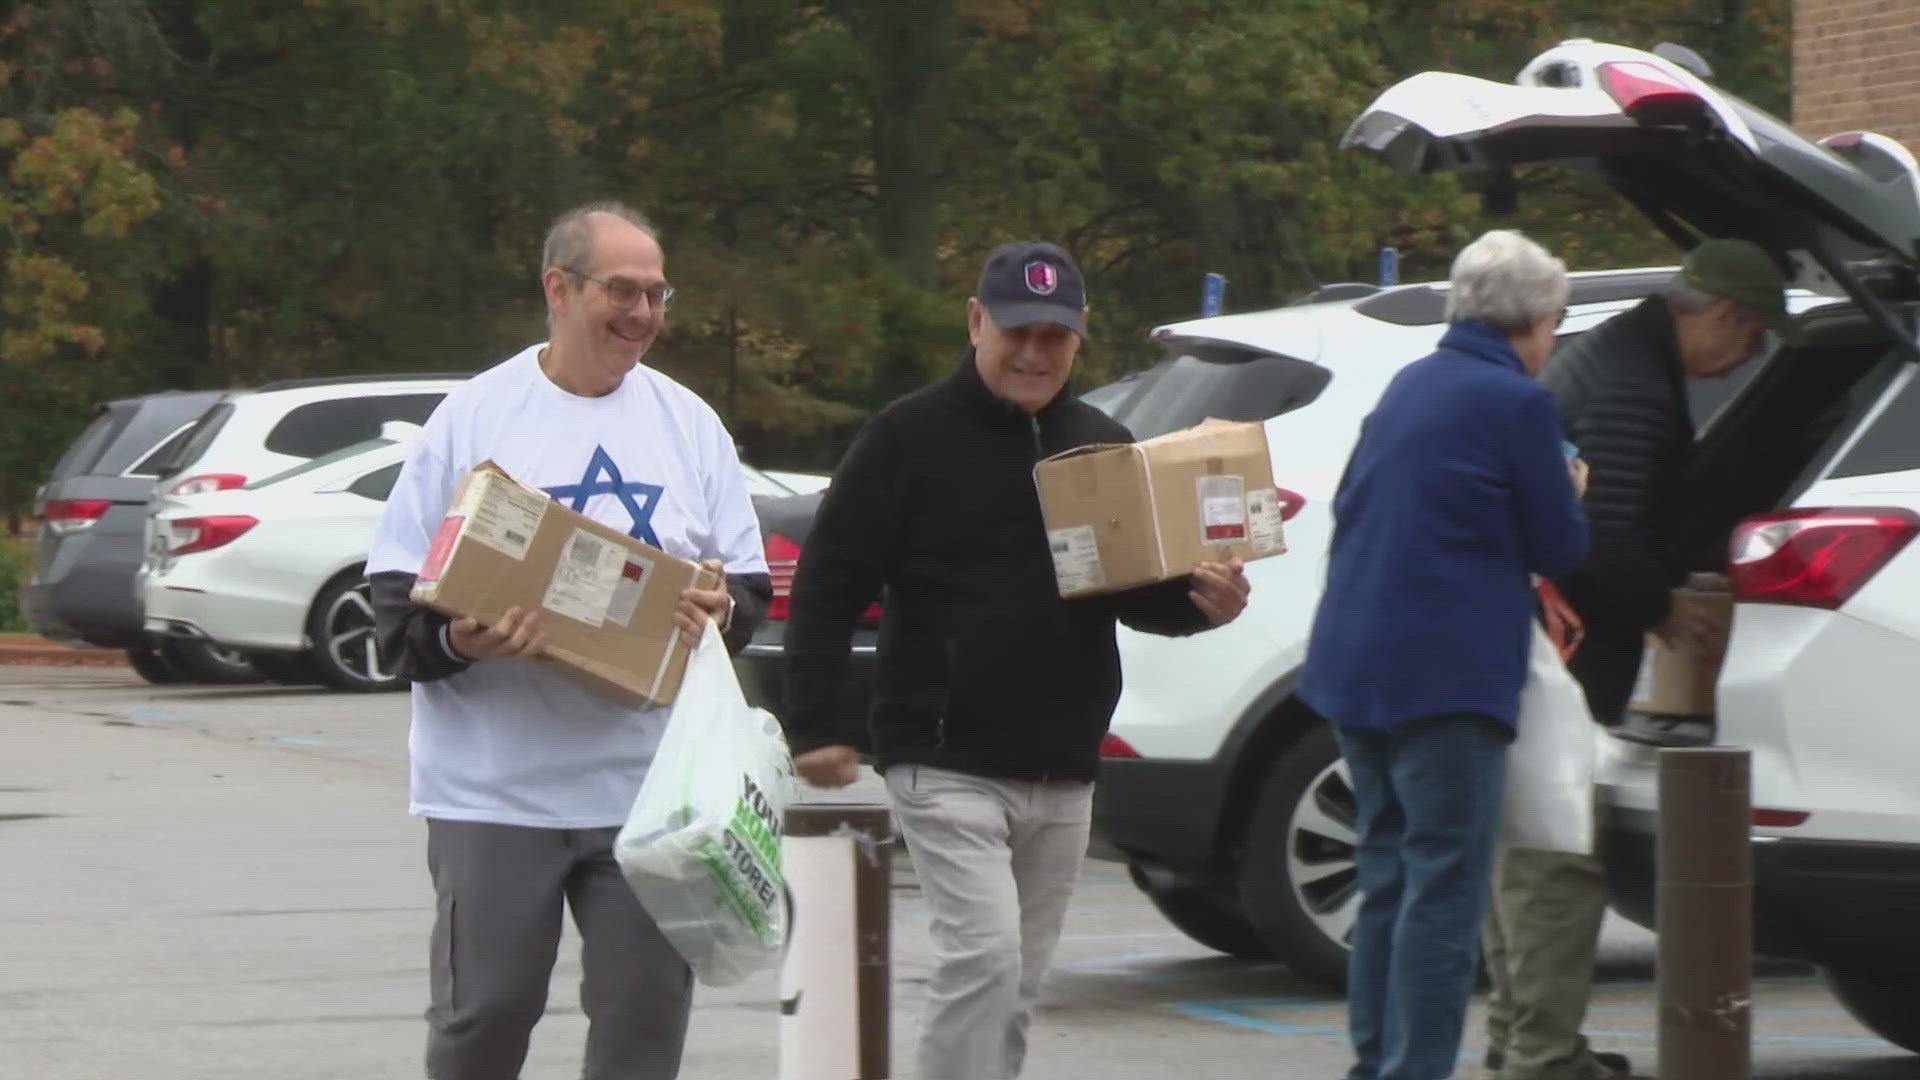 One local synagogue is deciding to give back. Several women at Congregation B'nai Amoona in Creve Coeur organized a donation drive Sunday morning.